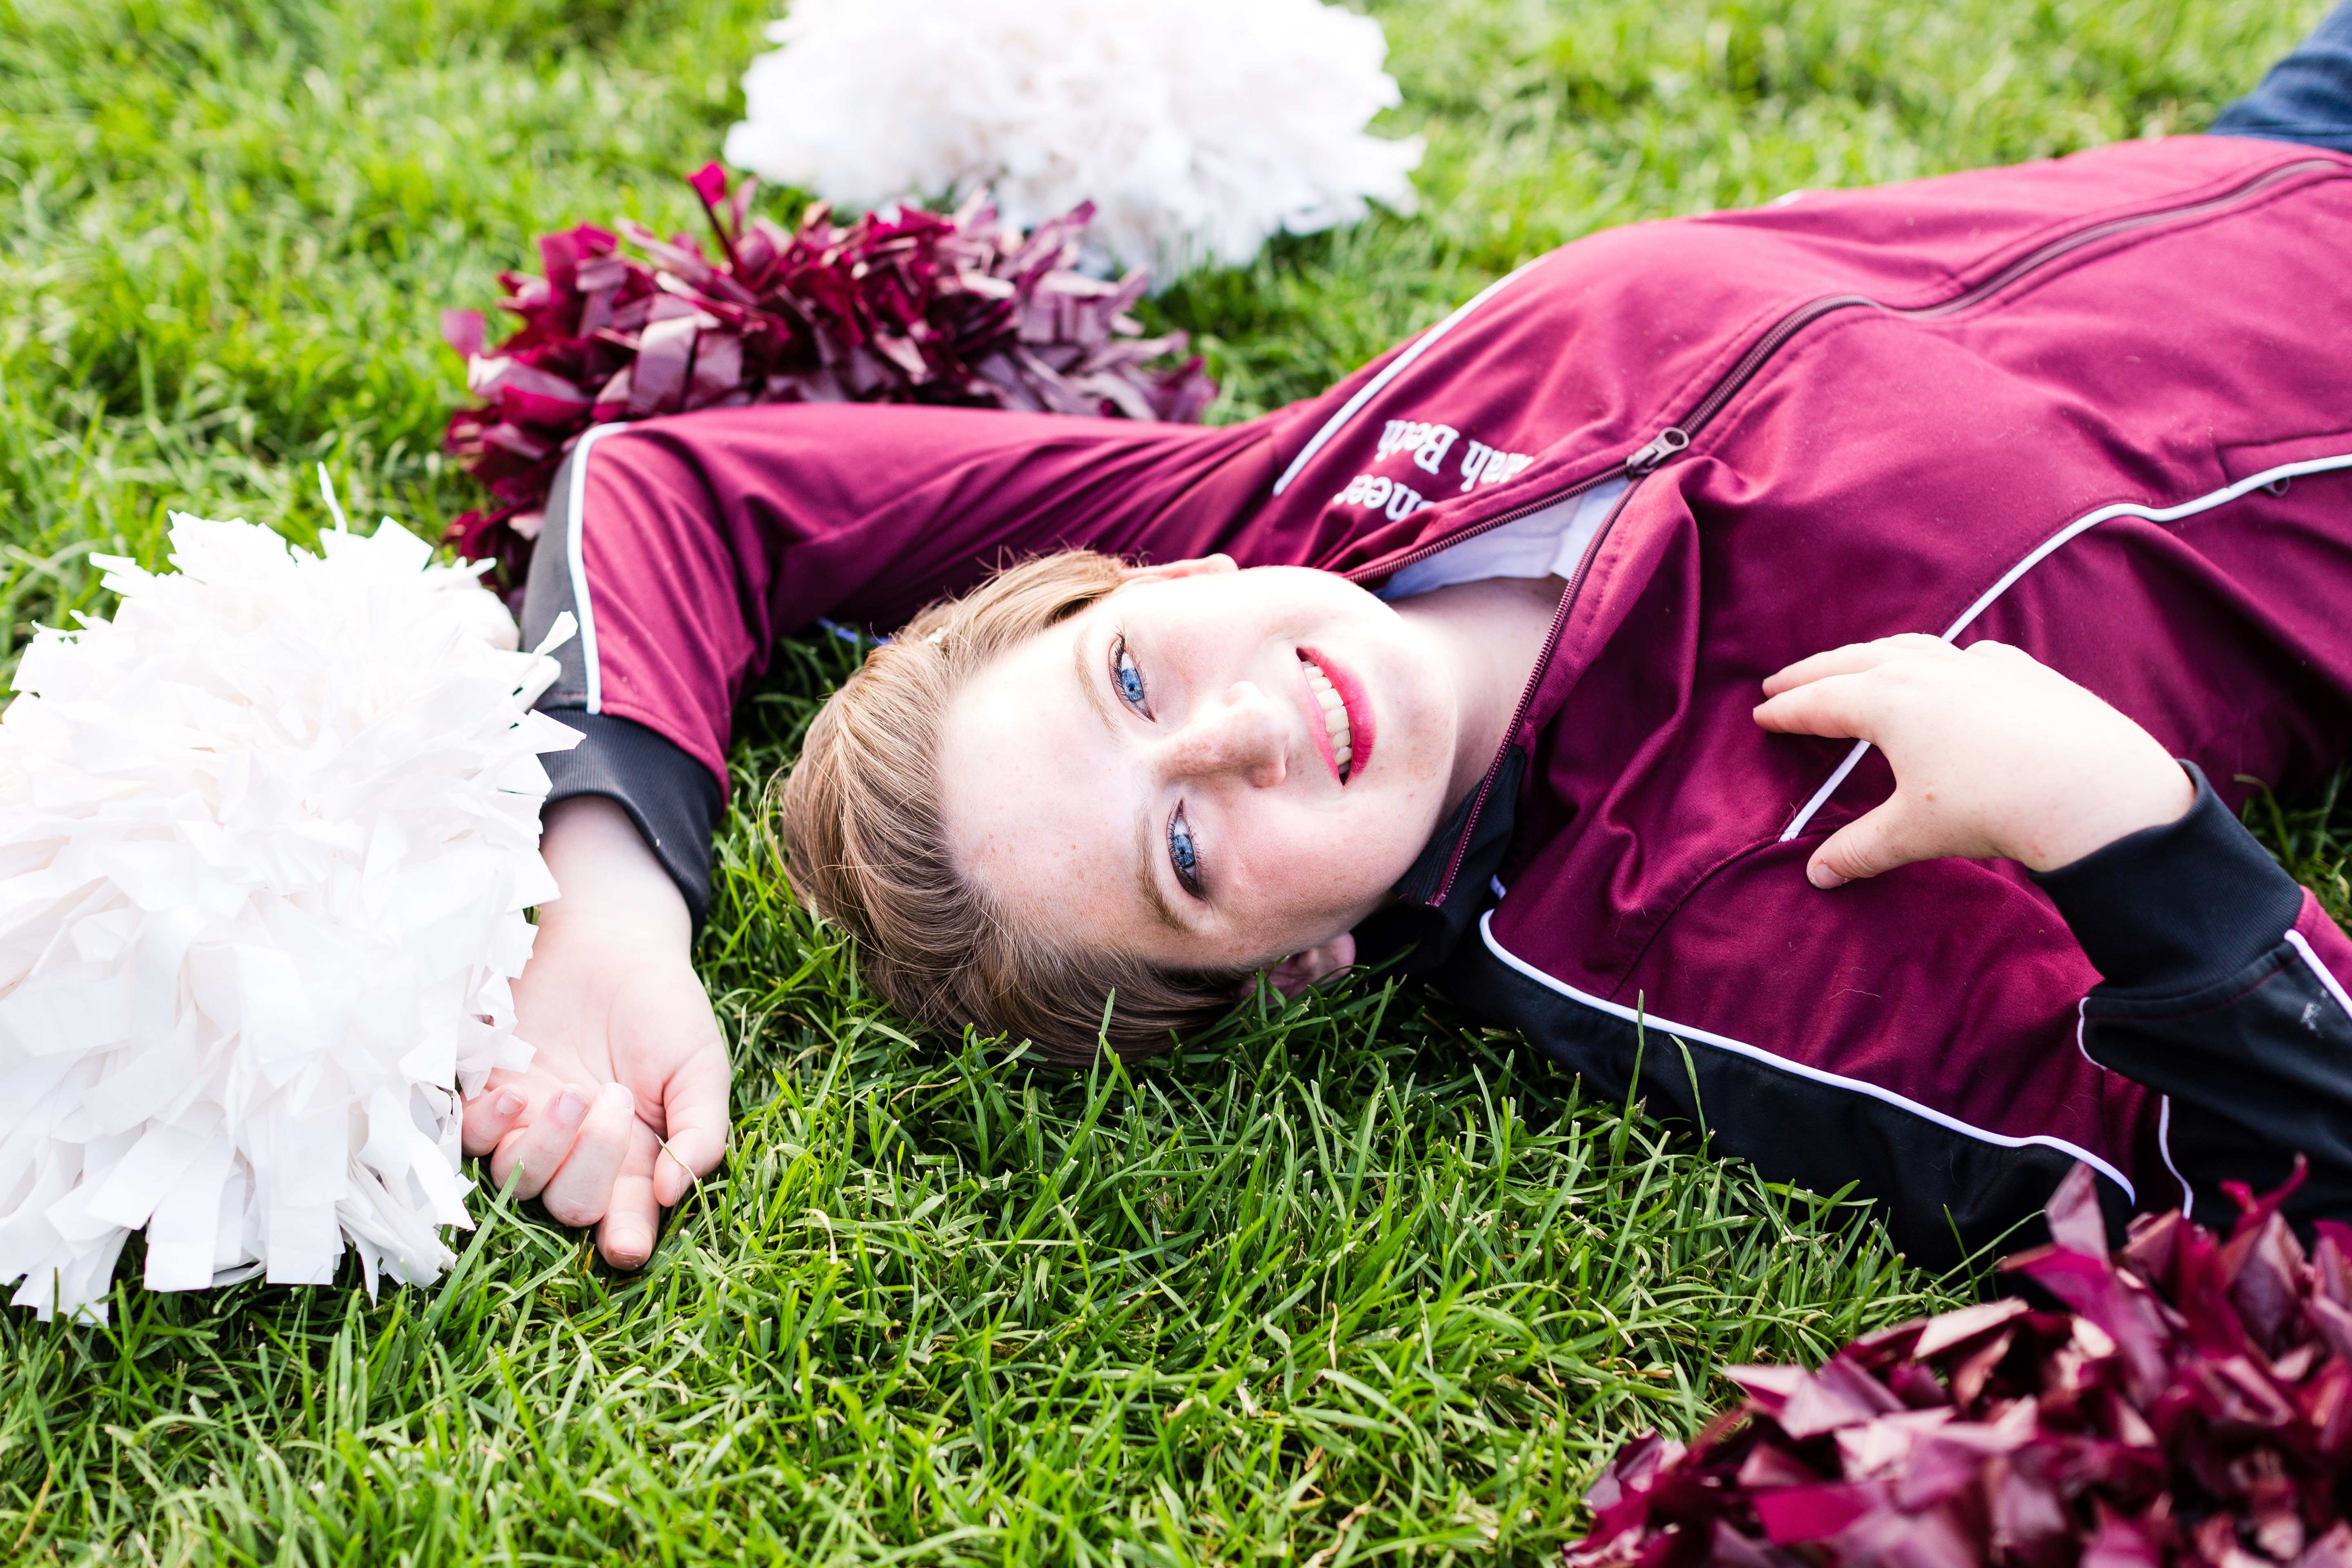 senior girl wearing a maroon and black cheerleader jacket lays in the grass surrounded by her maroon and white pom poms